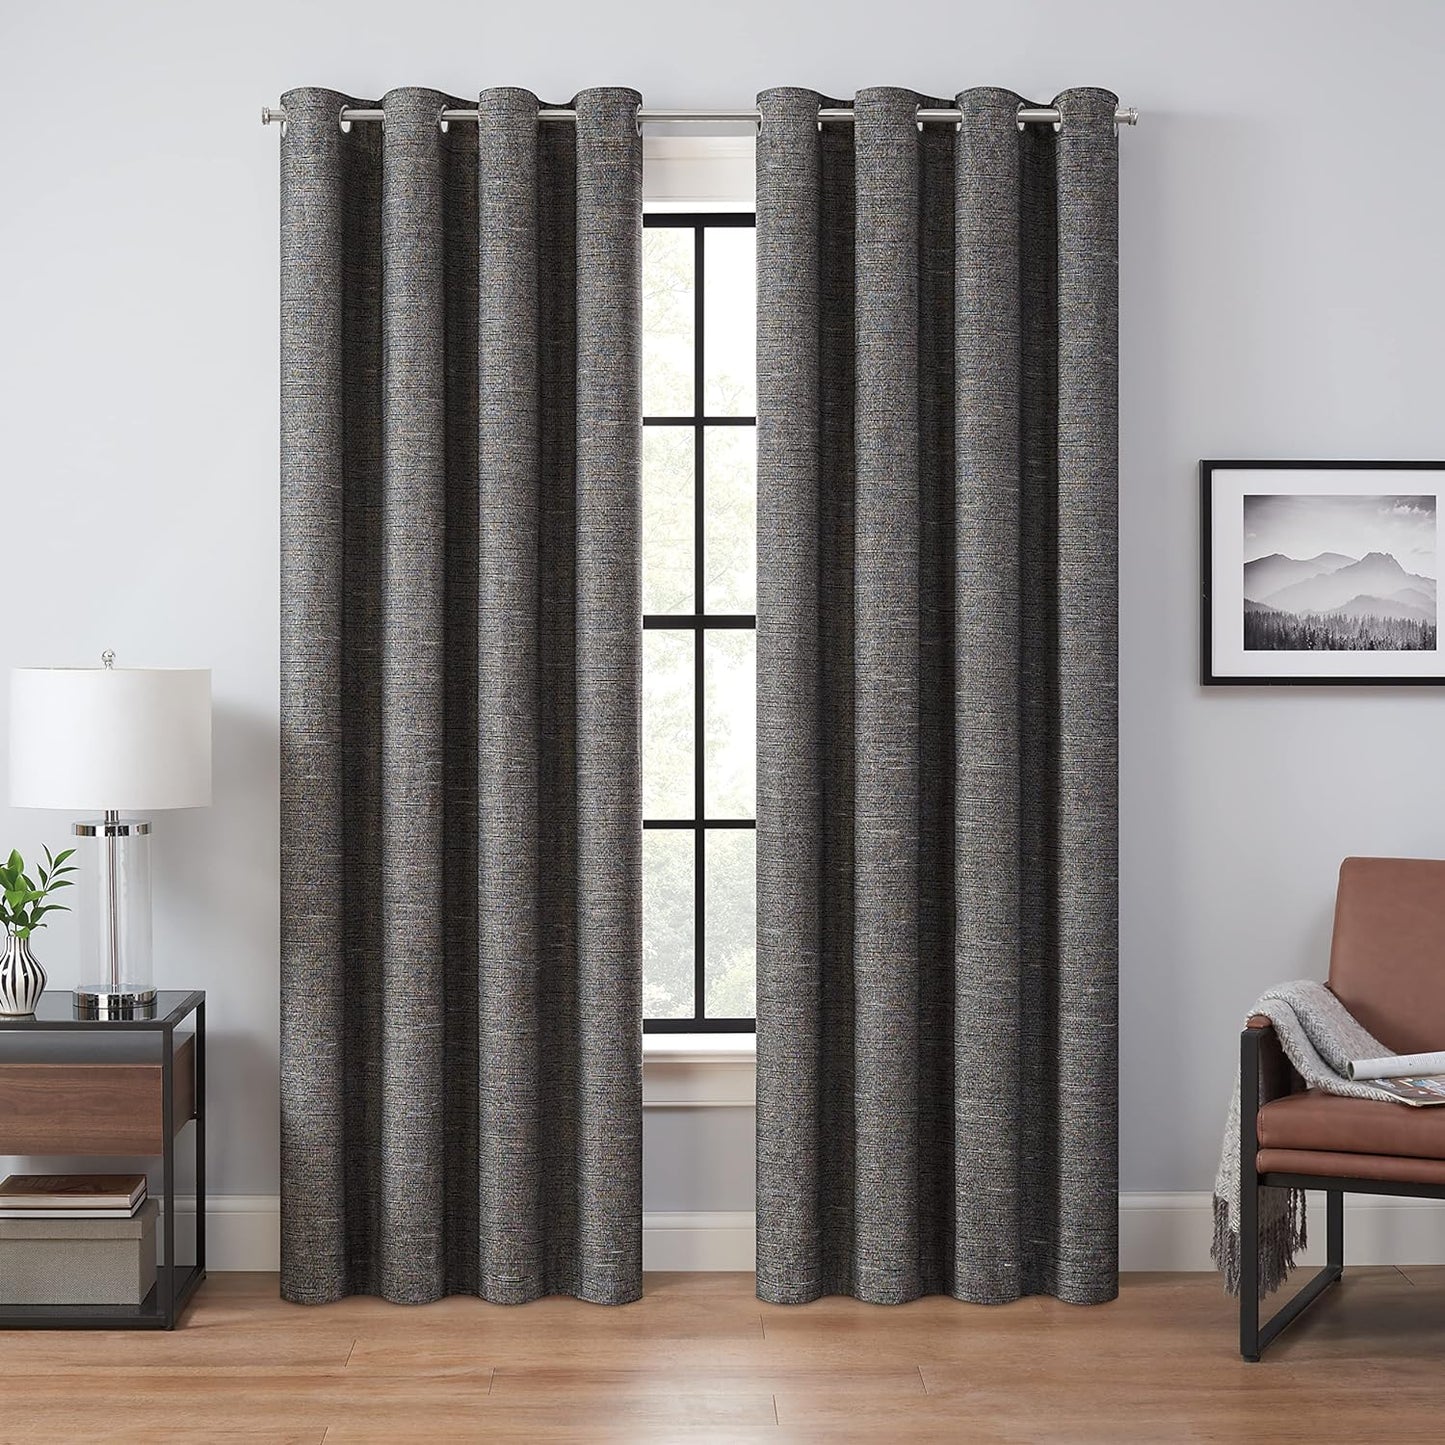 Eclipse Cannes Magnitech 100% Blackout Curtain, Rod Pocket Window Curtain Panel, Seamless Magnetic Closure for Bedroom, Living Room or Nursery, 63 in Long X 40 in Wide, (1 Panel), Natural/ Linen  KEECO Black Grommet 50X63